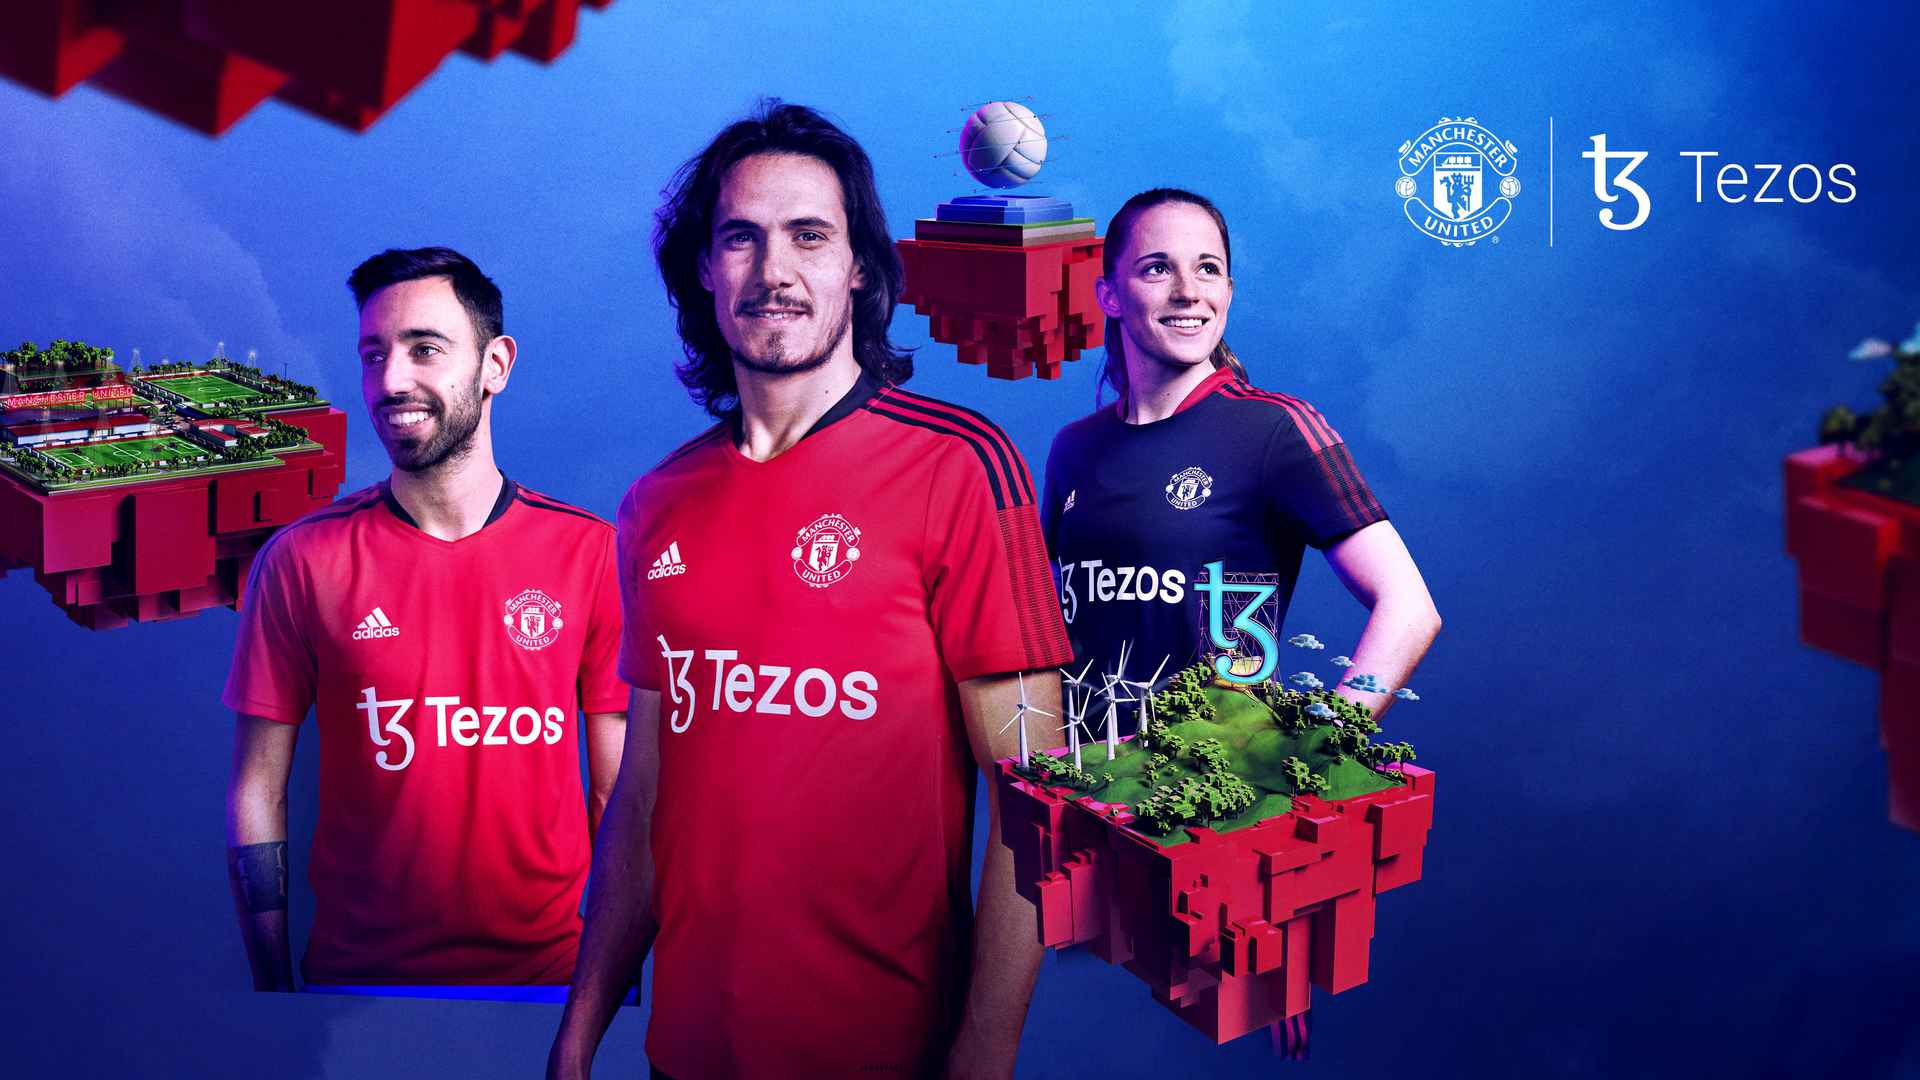 Tezos becomes official blockchain and training kit partner of Man Utd | Manchester United